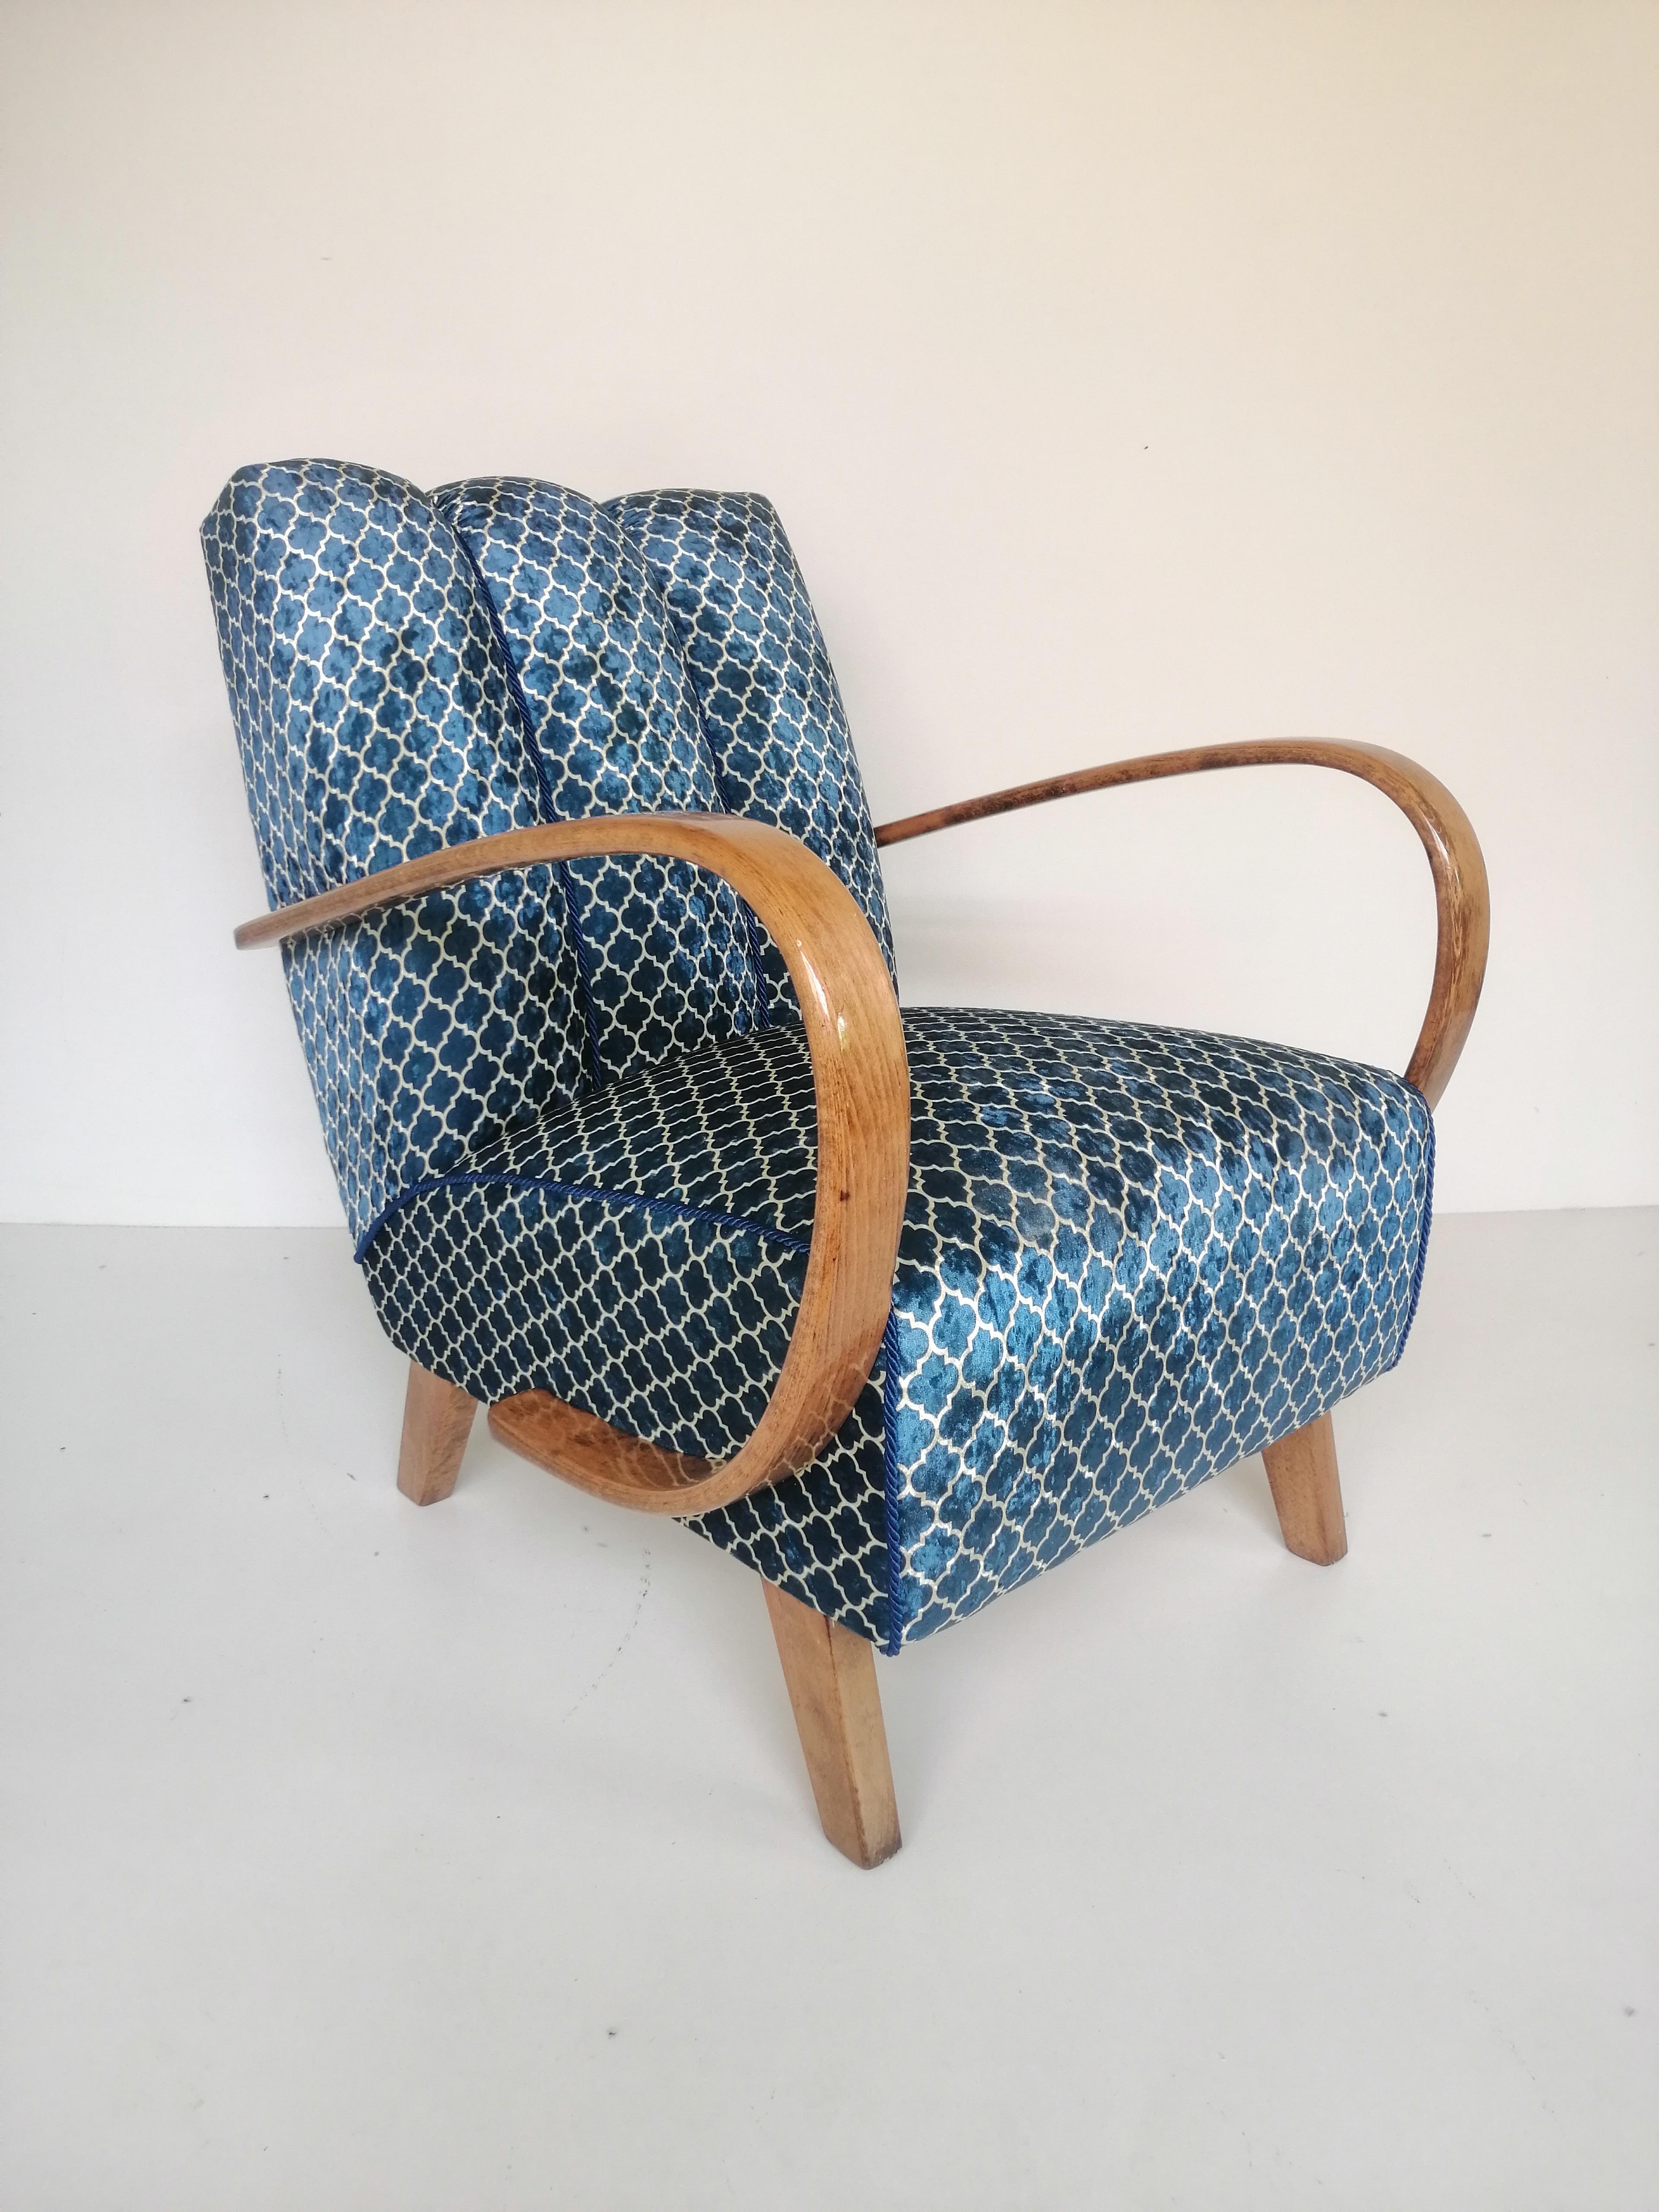 Art Deco armchair from 1940, Czech Republic.
Designed by a famous Czech designer Jindrich Halabala, (a Czech designer ranked among the most outstanding creators of the modern period. The peak of his career fell on the 1930s and 1940s when he worked